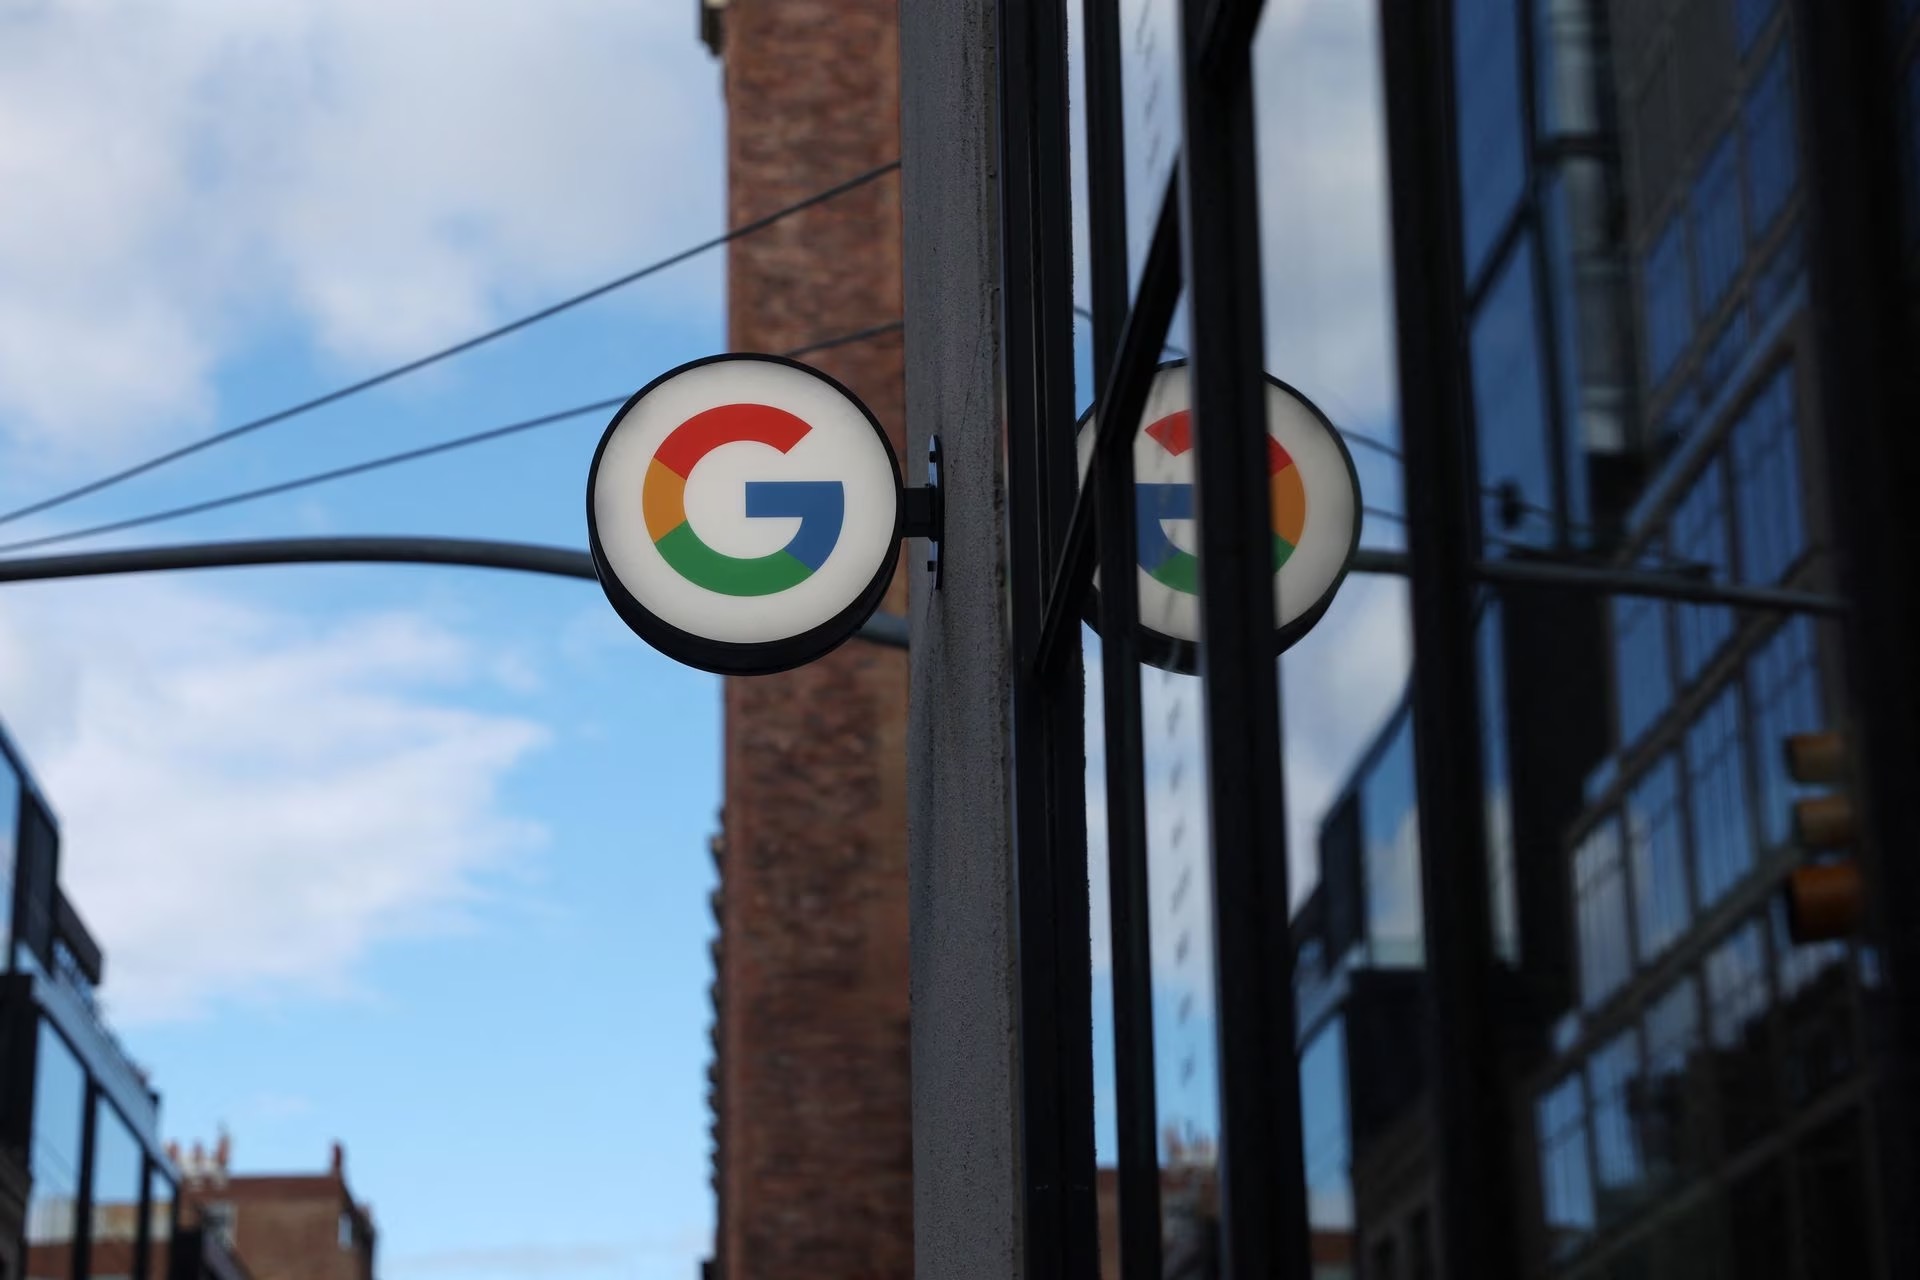 The logo of Google LLC is seen at the Google Store Chelsea in New York City, U.S., January 20, 2023. /Reuters